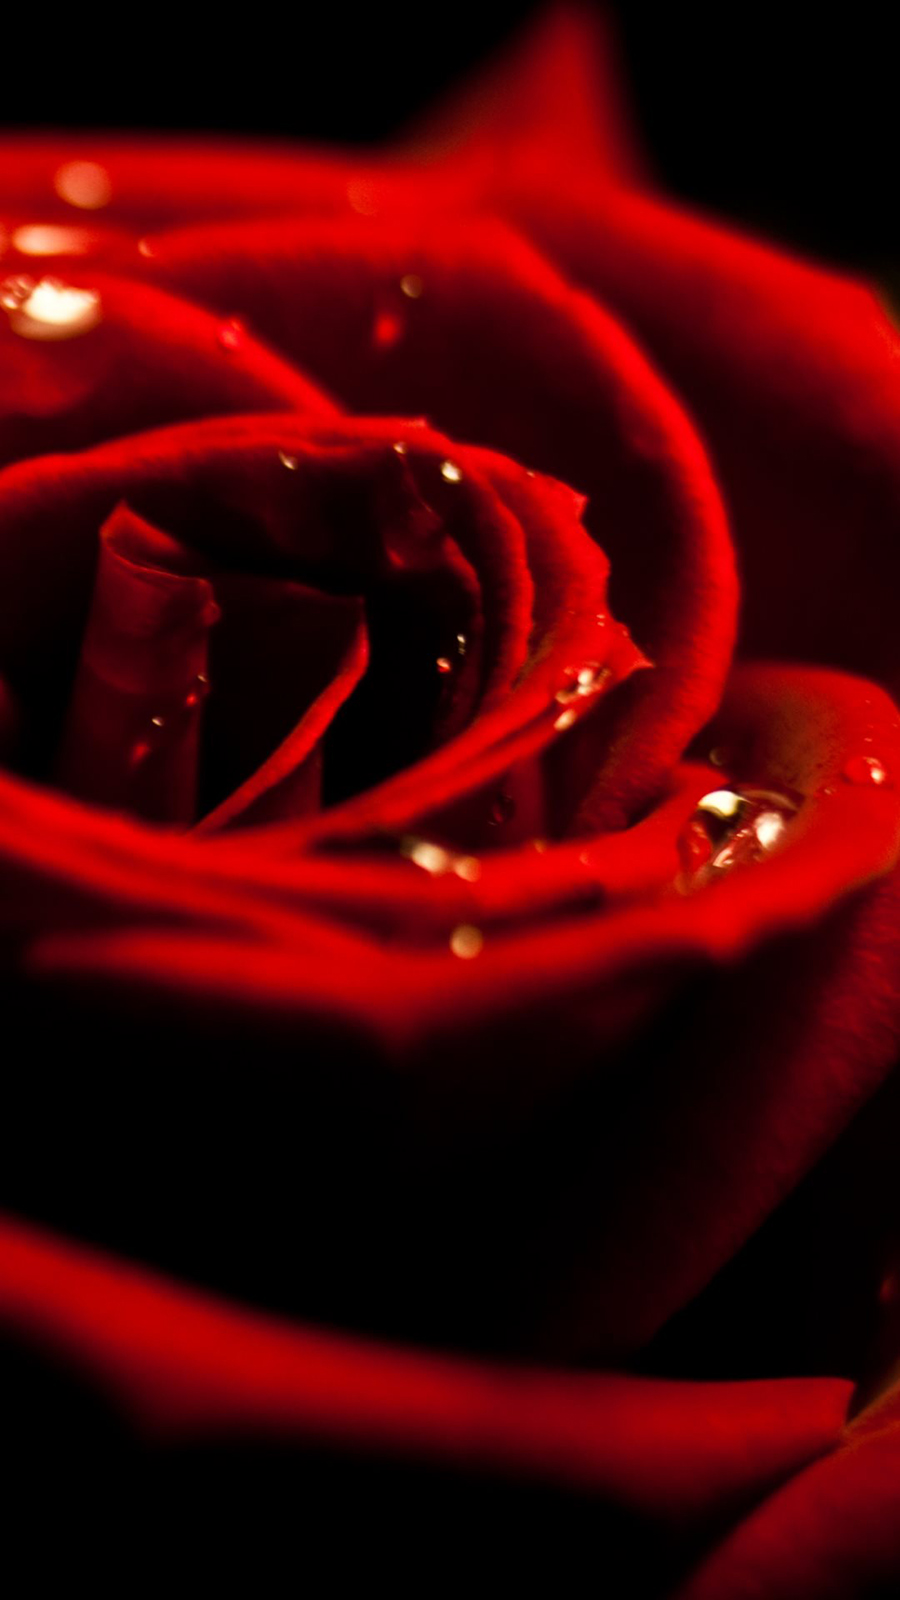 Red Rose Macro Dew Drops Valentines Gift Android Wallpaper